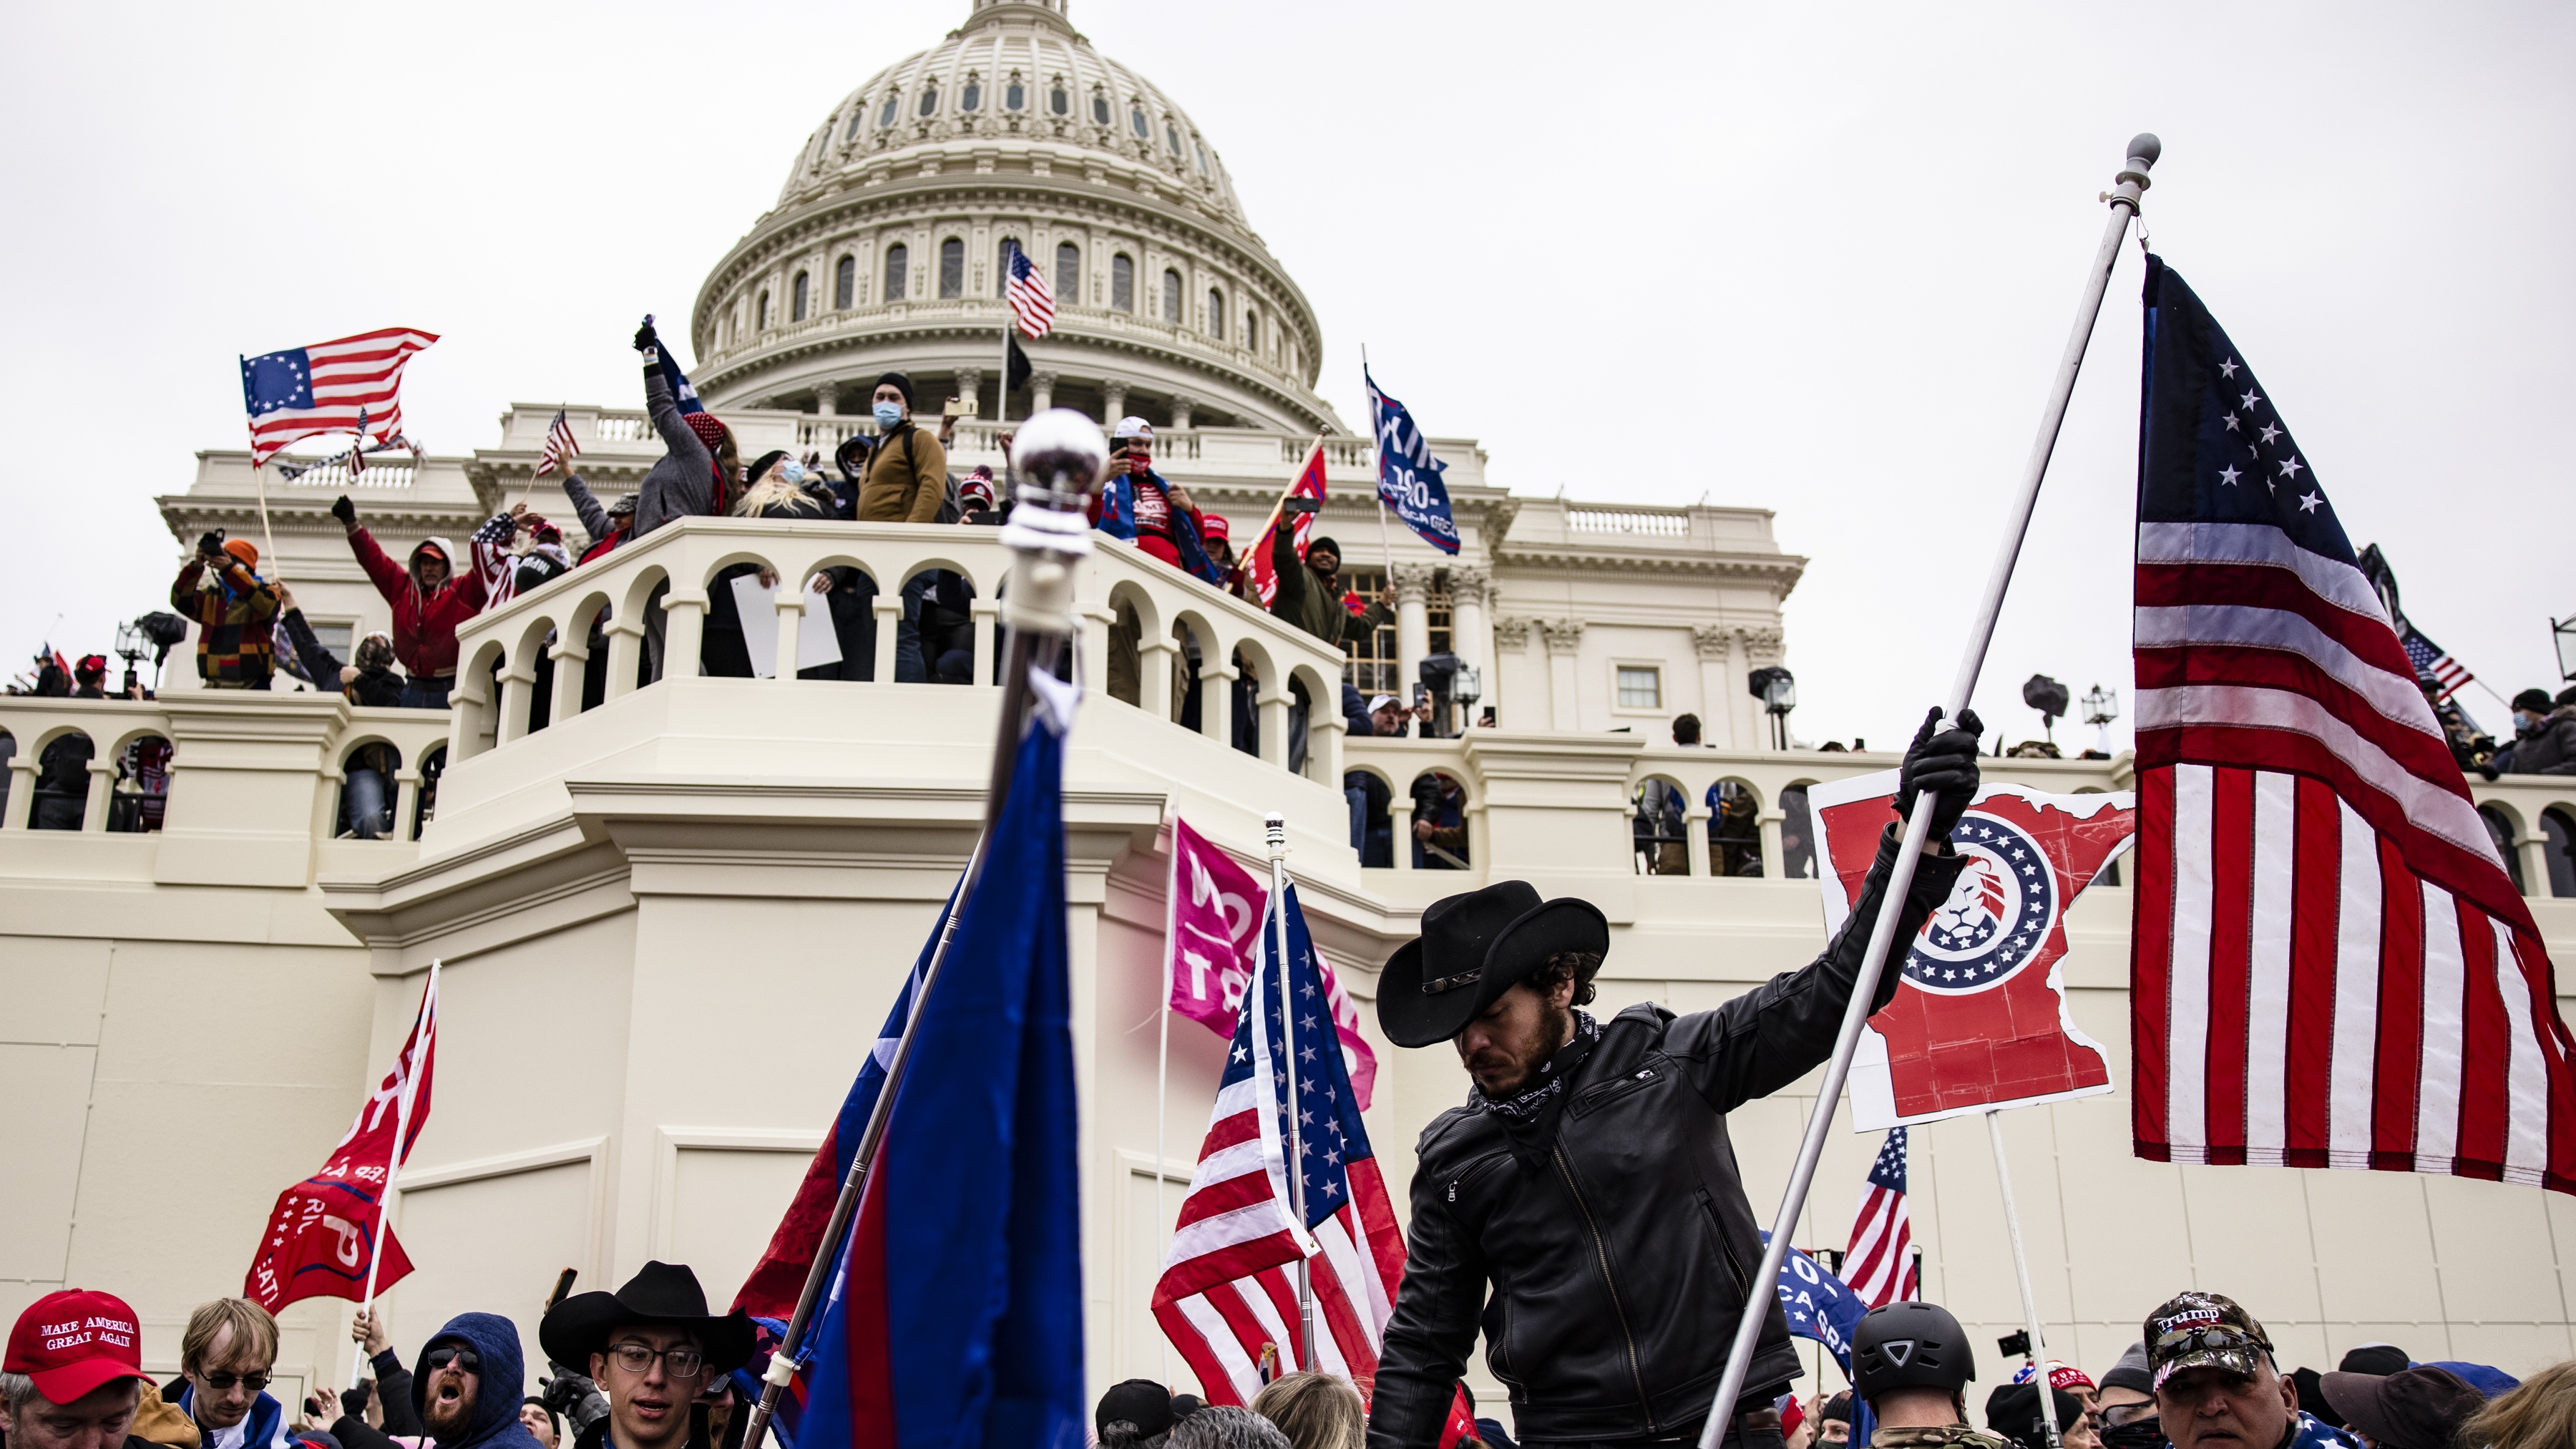 Pro-Trump supporters storm the U.S. Capitol following a rally with President Donald Trump.